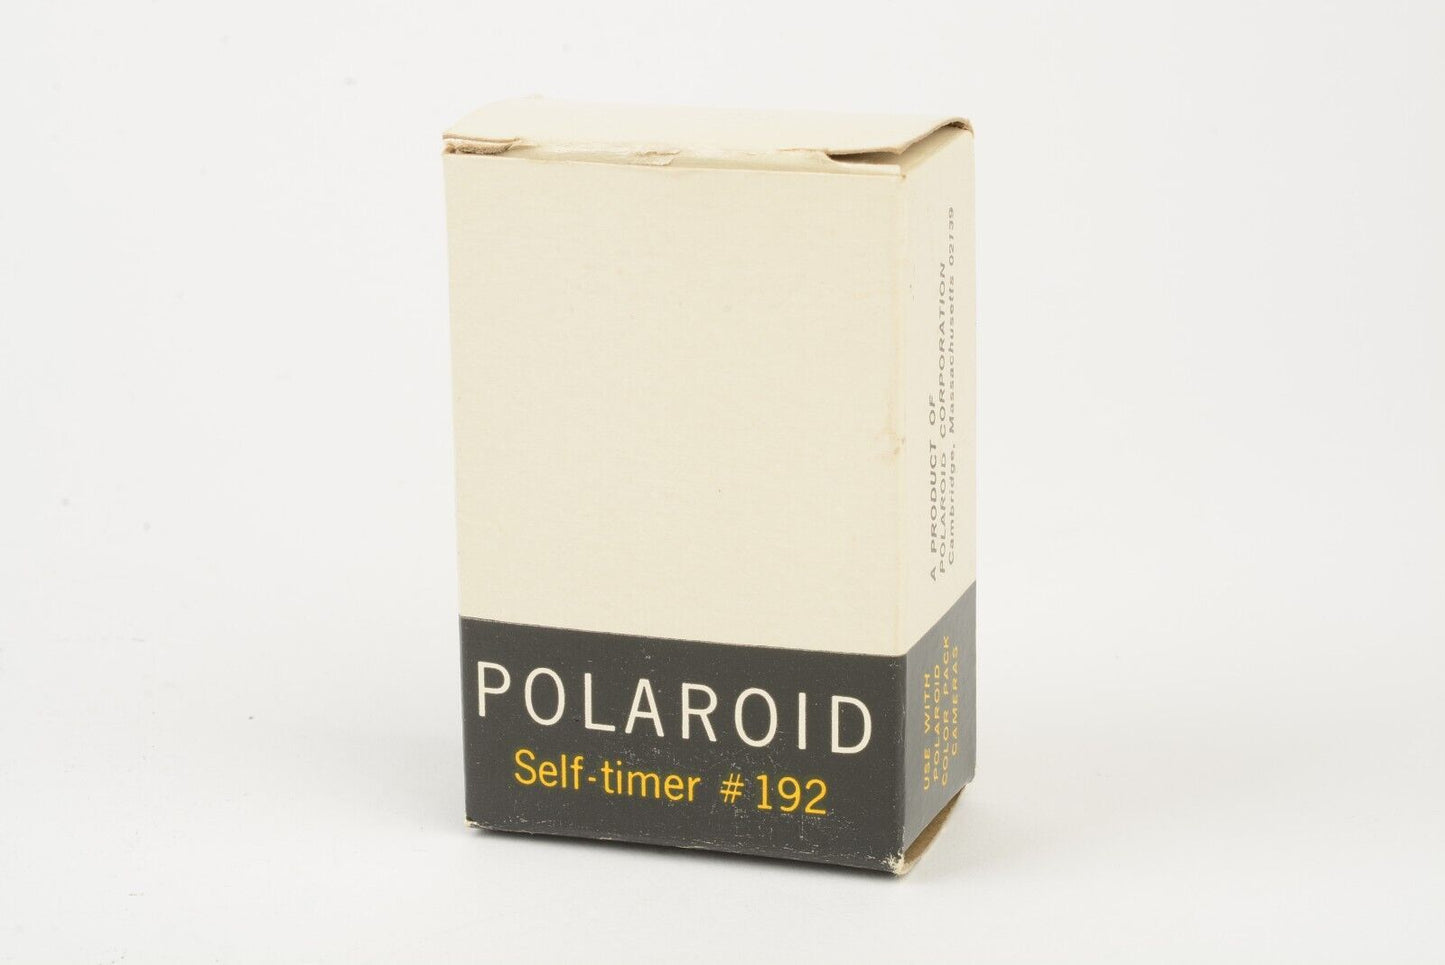 MINT BOXED POLAROID #192 SELF TIMER IN JEWEL CASE